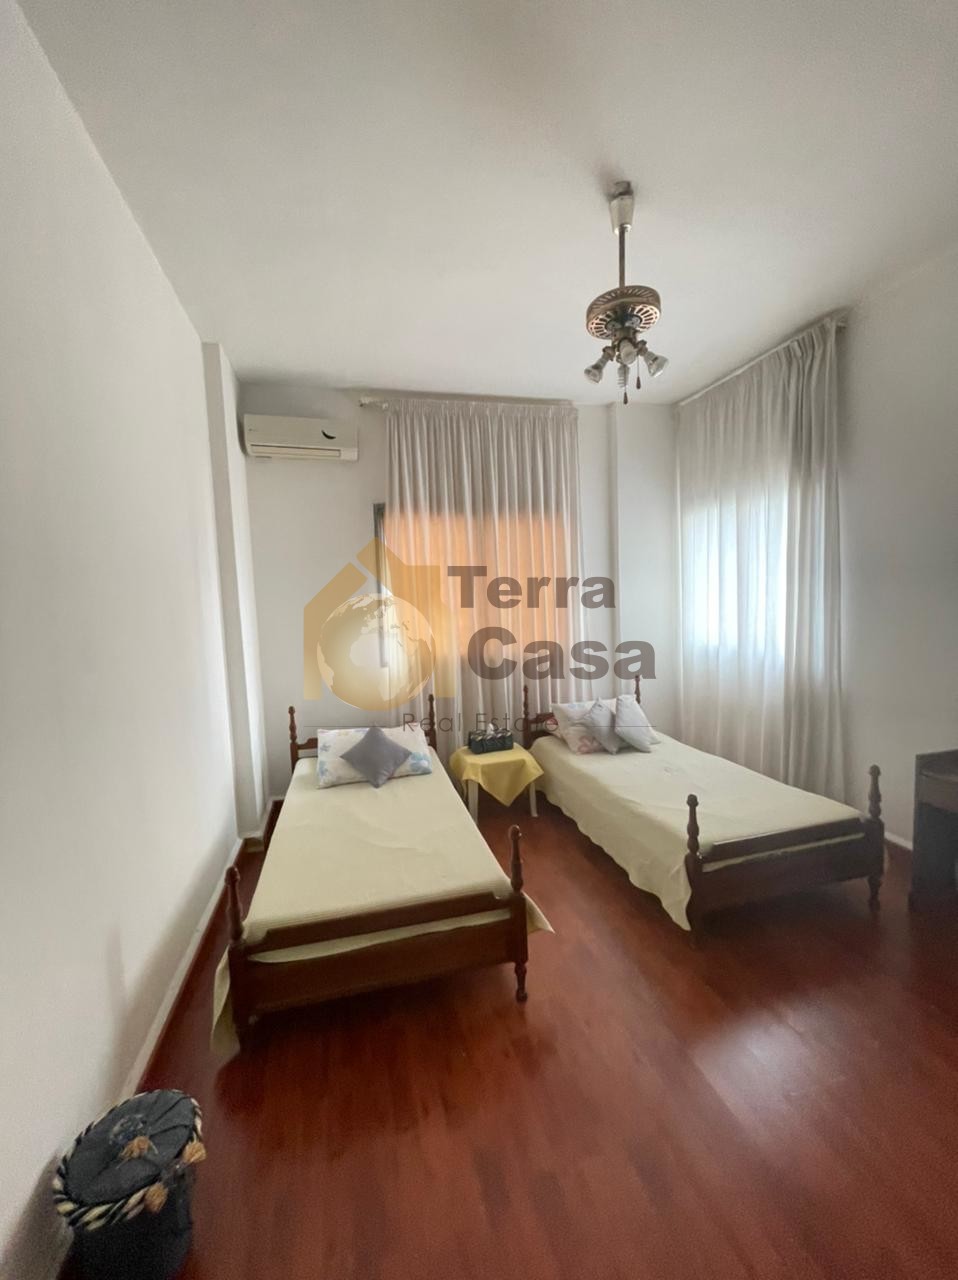 Fassouh fully furnished apartment for rent .